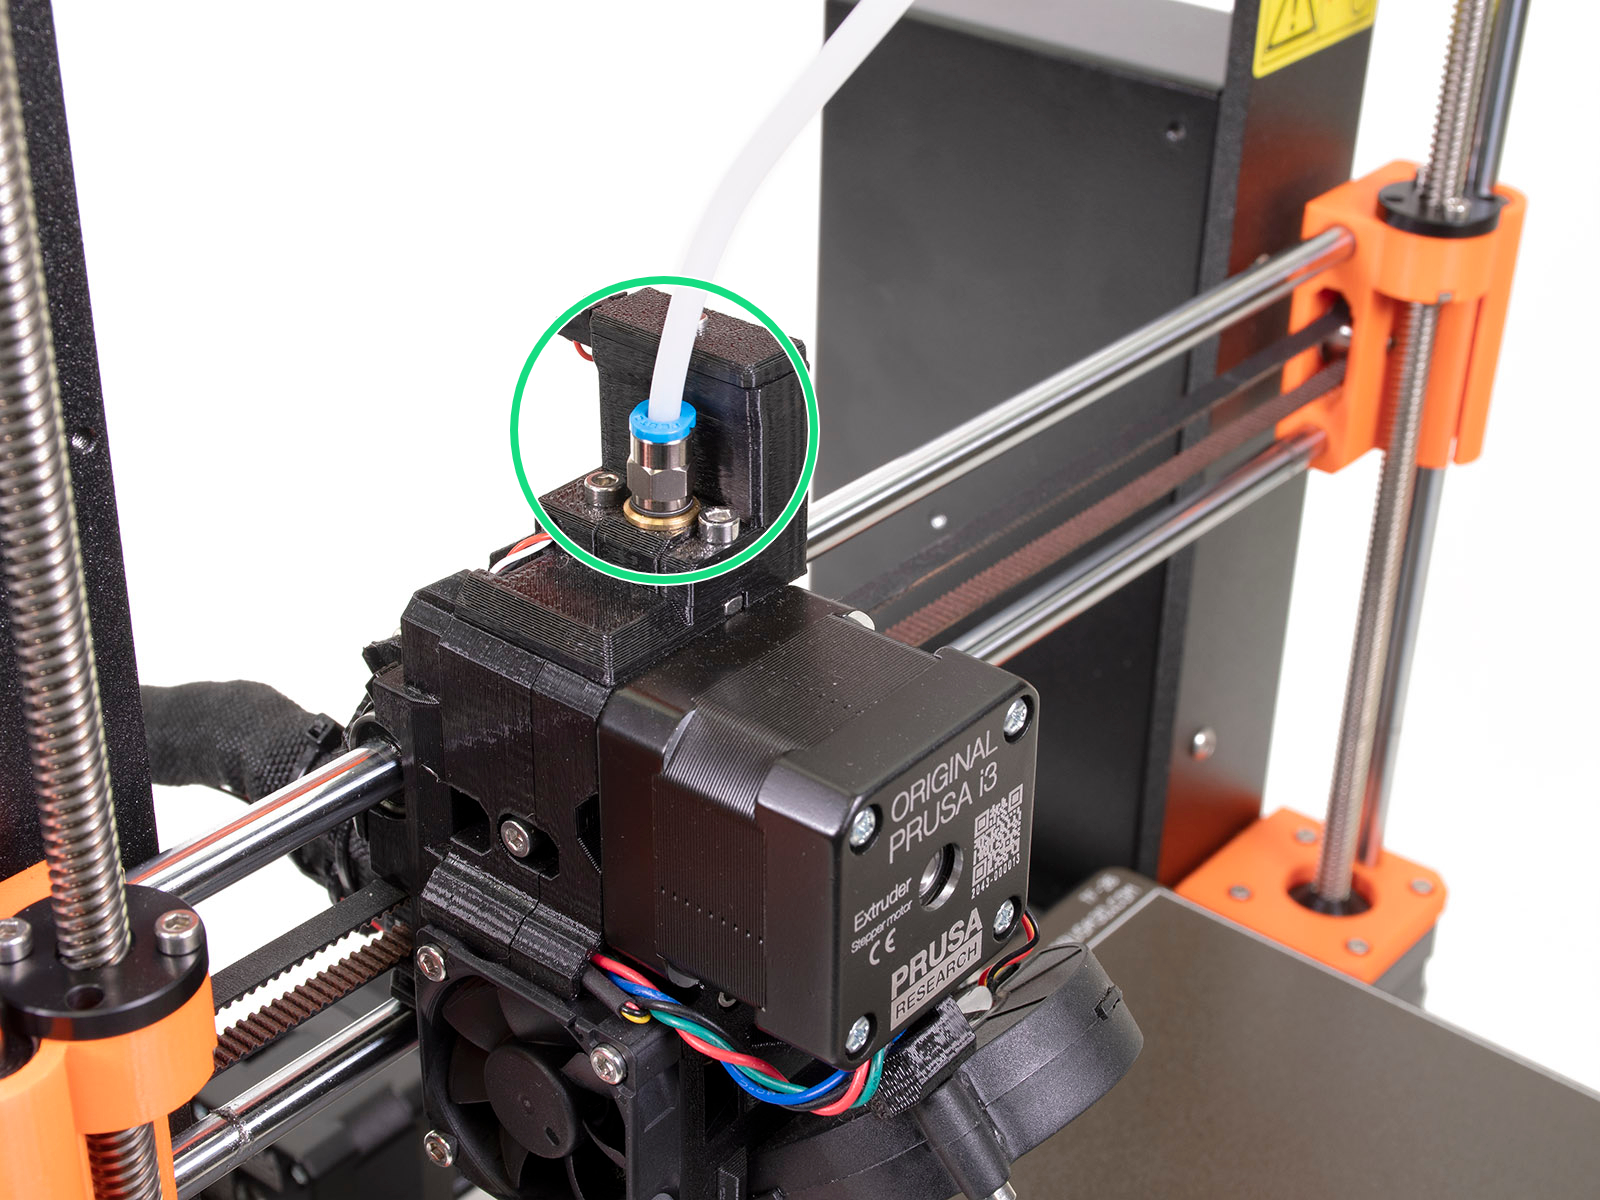 Connecting the extruder and MMU2S unit